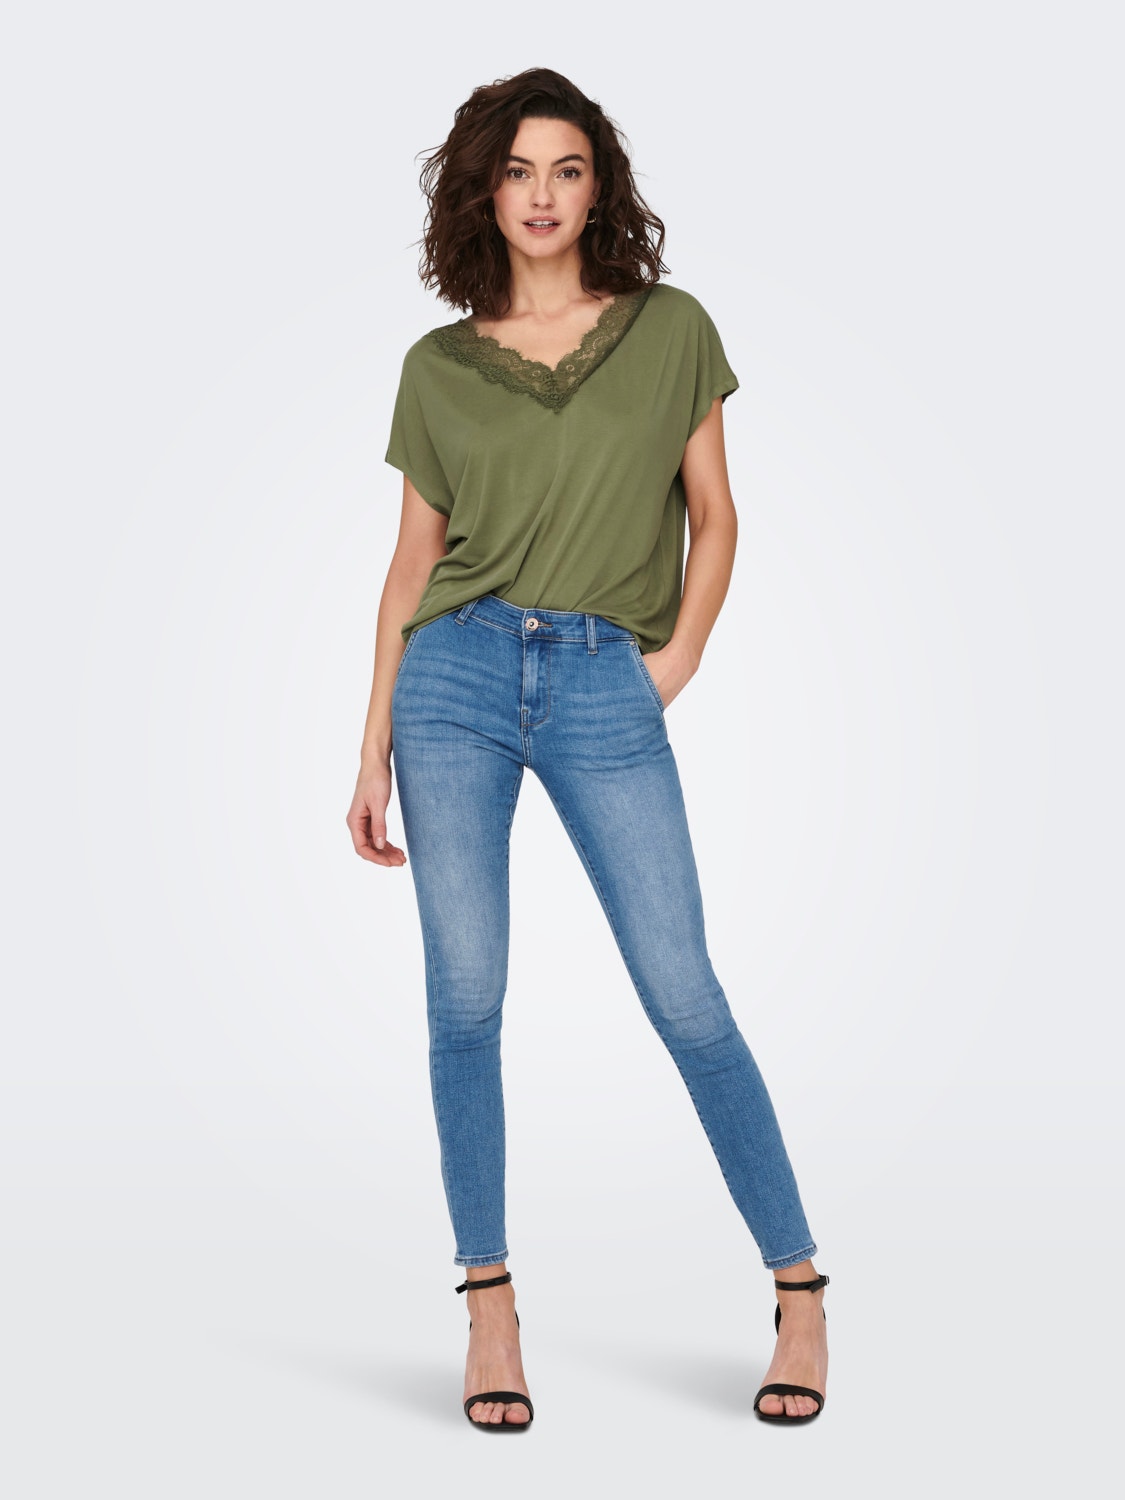 ONLY v-neck top with lace details -Martini Olive - 15289596